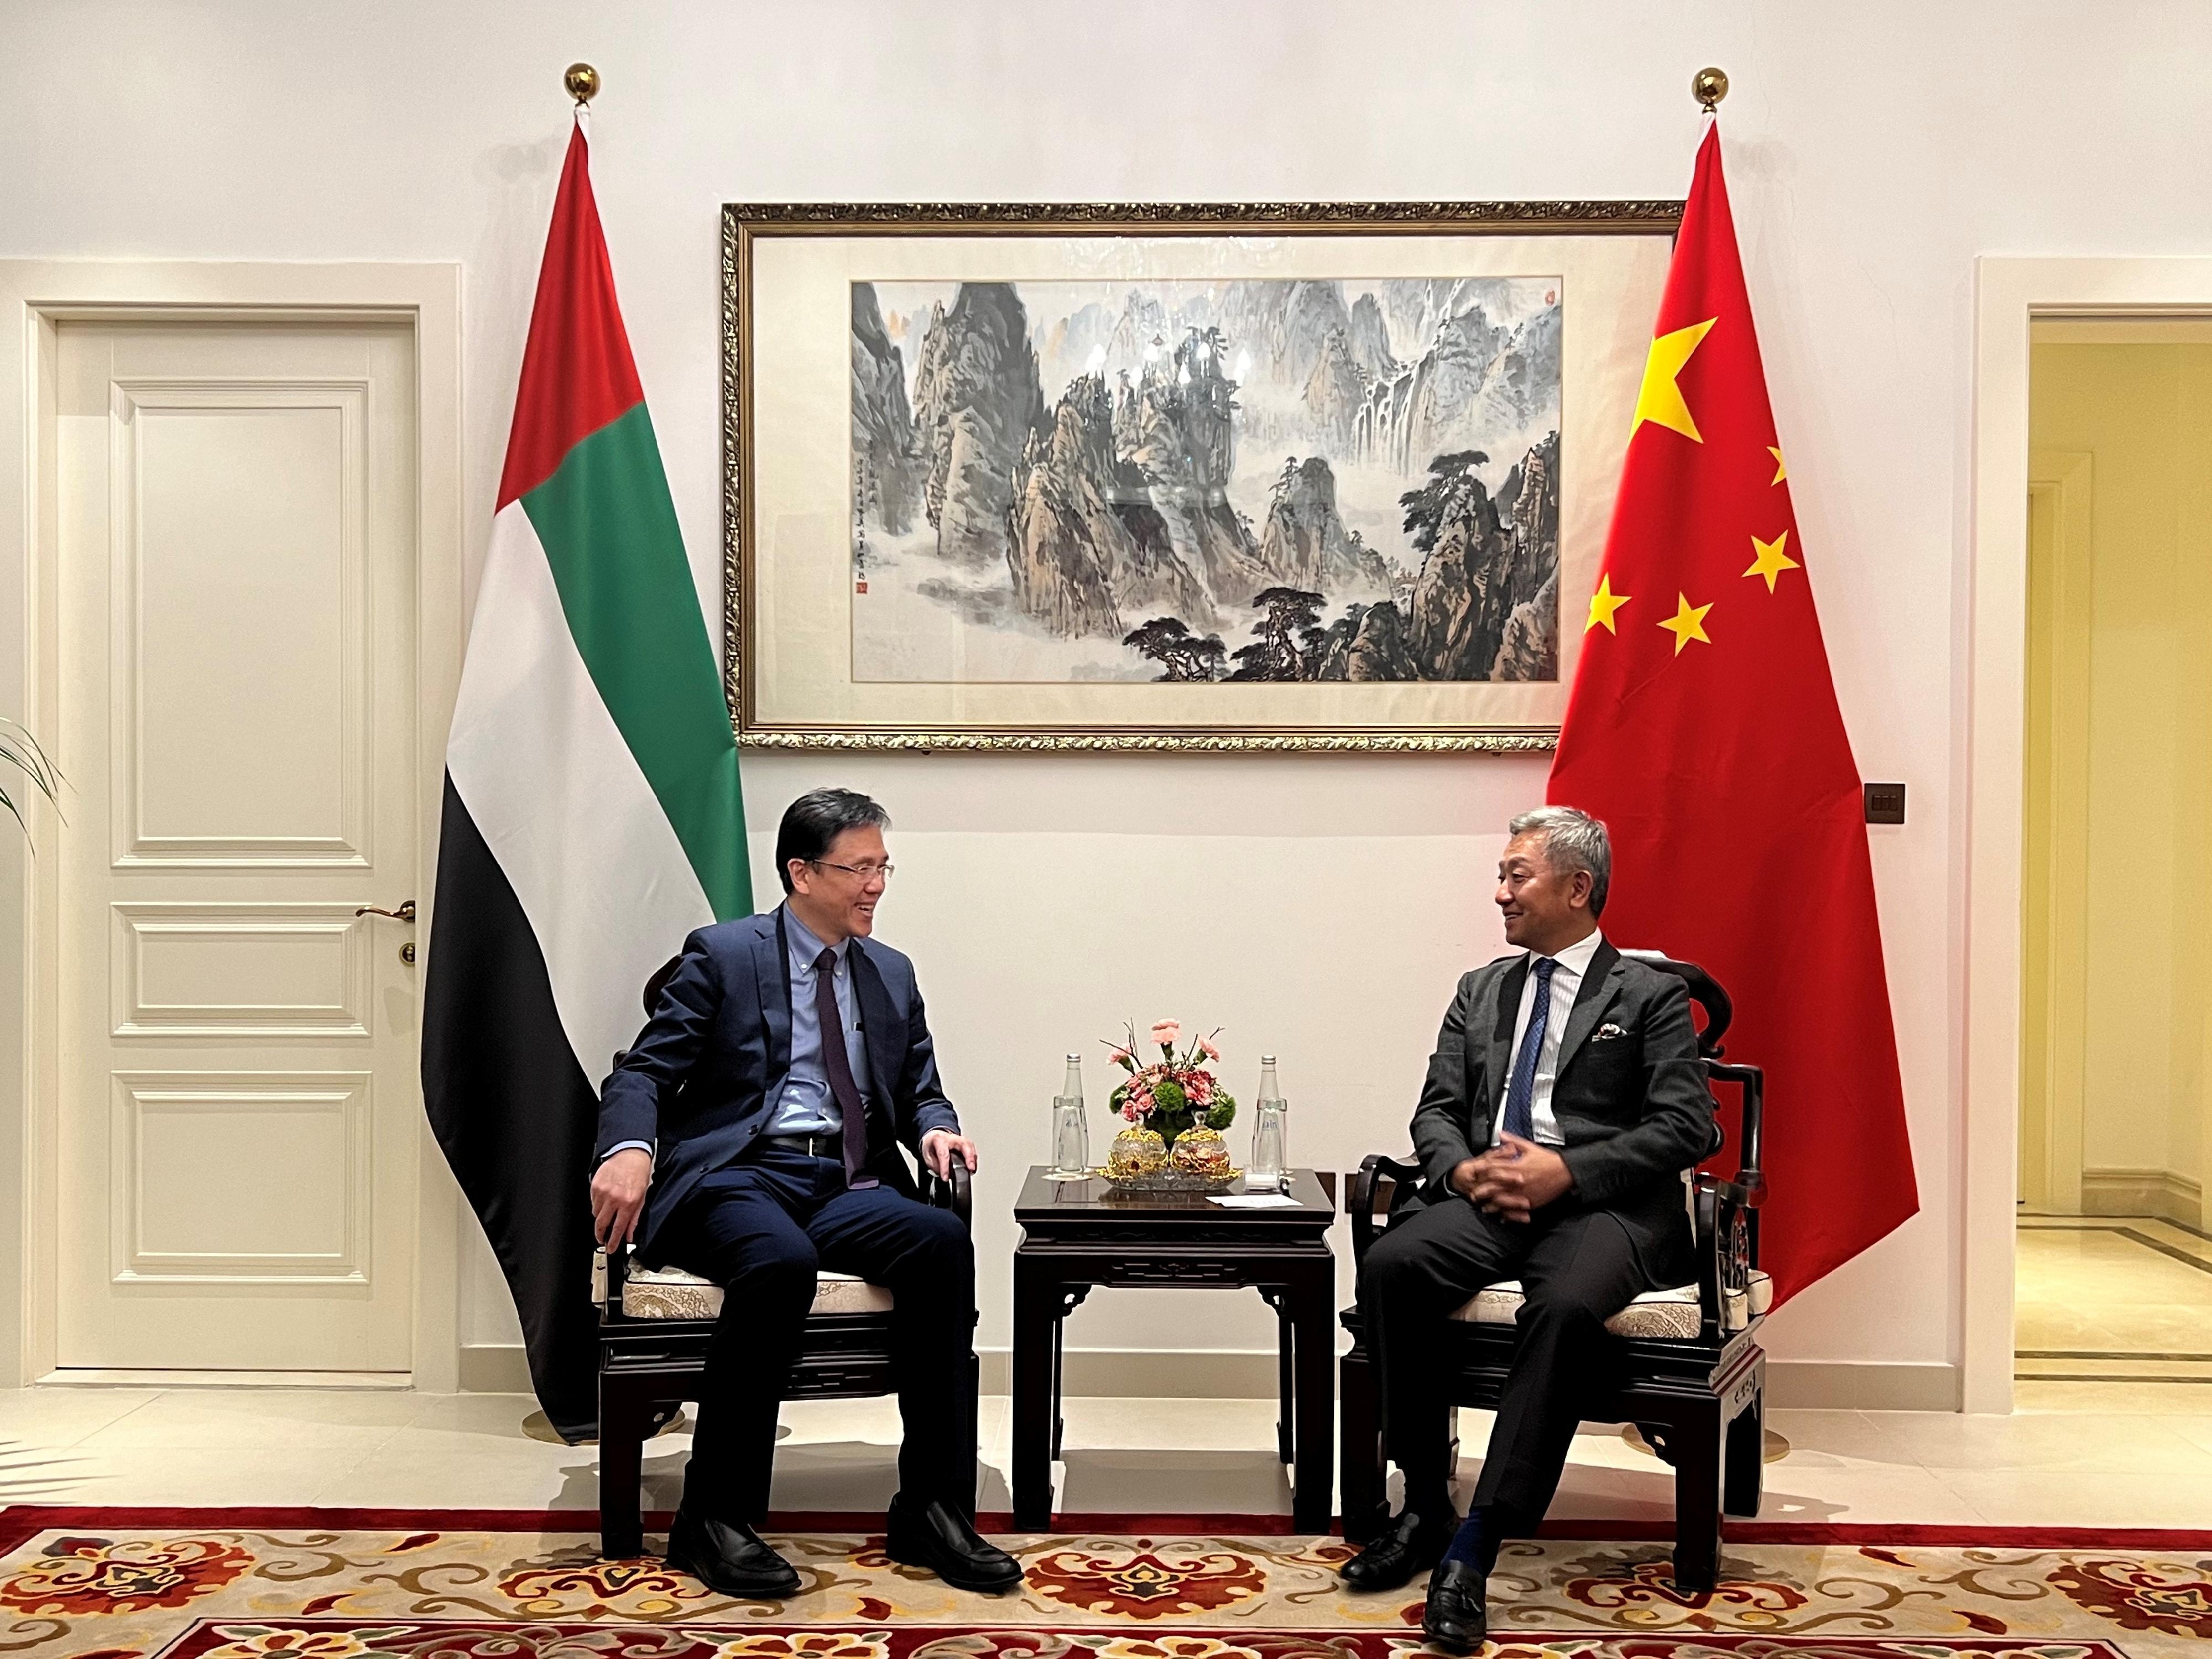 The Secretary for Innovation, Technology and Industry, Professor Sun Dong (left), met with the Ambassador Extraordinary and Plenipotentiary of the People's Republic of China to the United Arab Emirates, Mr Zhang Yiming (right), on March 7 (Abu Dhabi time). Professor Sun introduced the latest initiatives of the Hong Kong Special Administrative Region Government to promote the development of innovation and technology and new industrialisation in Hong Kong.